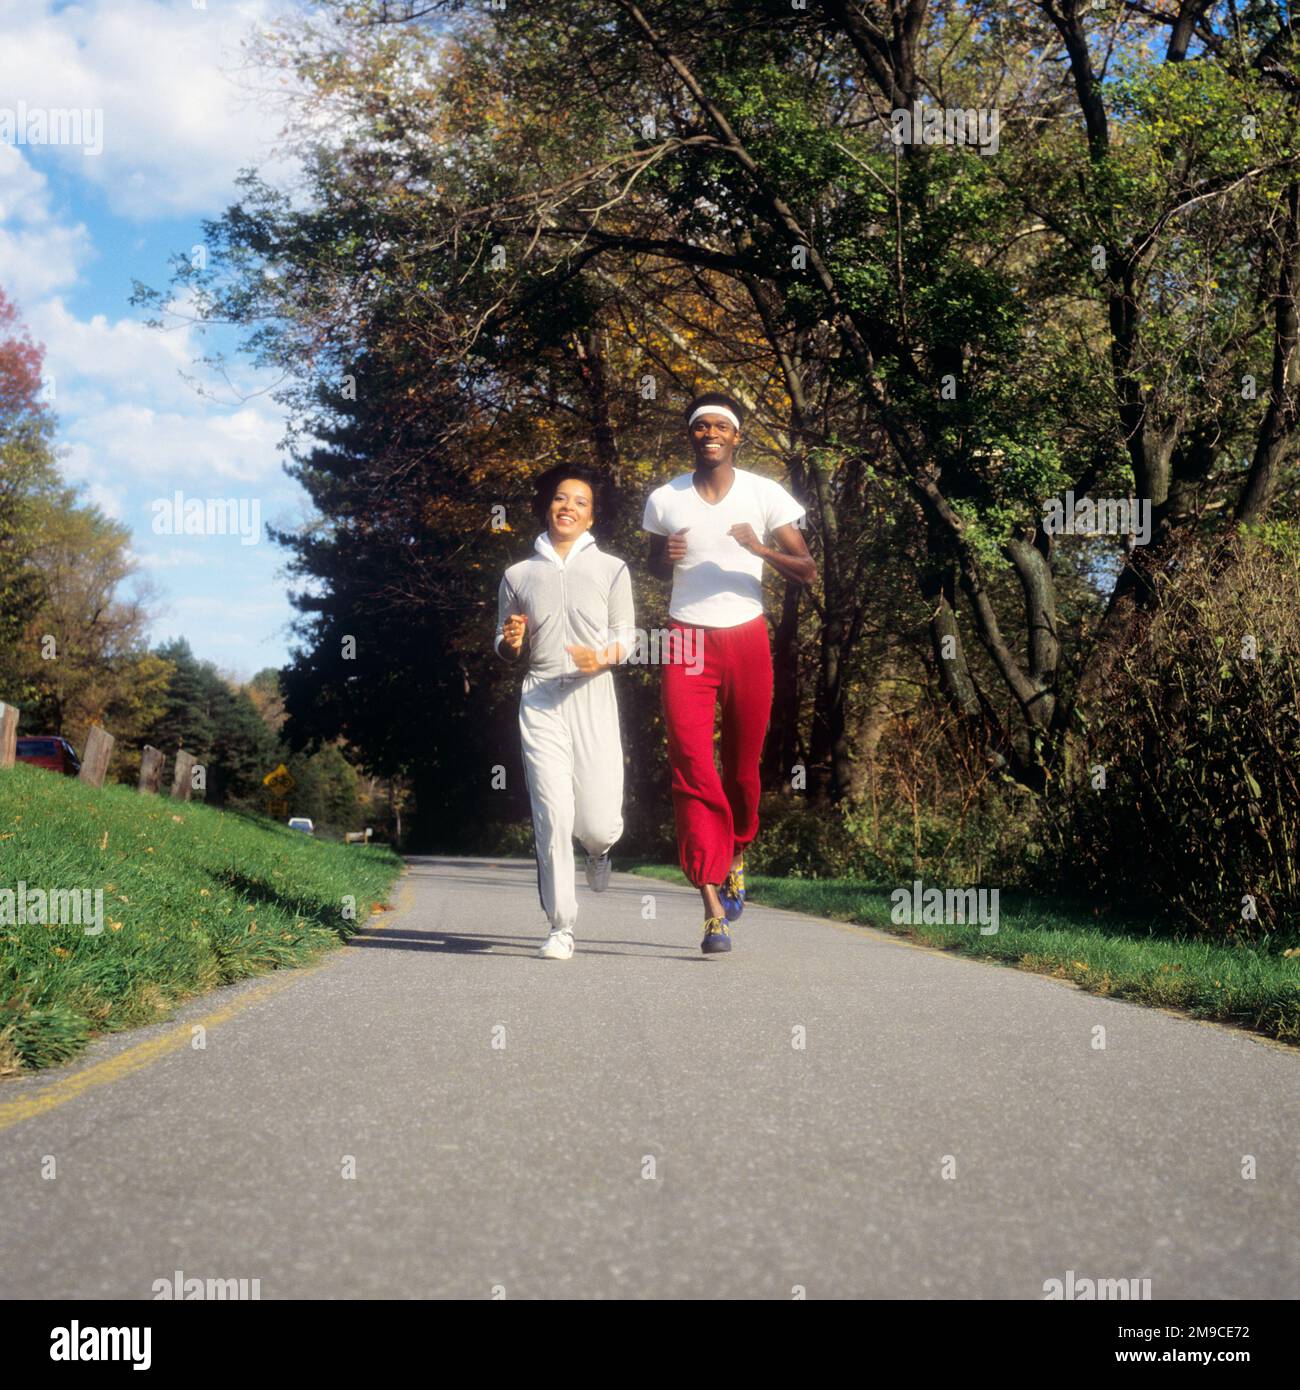 1980s ATHLETIC SMILING AFRICAN AMERICAN YOUNG COUPLE MAN AND WOMAN JOGGING TOGETHER IN PARK LOOKING AT CAMERA - ks21223 TEU001 HARS STYLE HEALTHY FRIEND YOUNG ADULT SAFETY ATHLETE PLEASED JOY LIFESTYLE SATISFACTION FEMALES MARRIED SPOUSE HUSBANDS RUNNERS HEALTHINESS ATHLETICS COPY SPACE FRIENDSHIP FULL-LENGTH LADIES PHYSICAL FITNESS PERSONS MALES ATHLETIC CONFIDENCE PARTNER EYE CONTACT GOALS ACTIVITY HAPPINESS PHYSICAL CHEERFUL STRENGTH AFRICAN-AMERICANS AFRICAN-AMERICAN LOW ANGLE RECREATION BLACK ETHNICITY PRIDE JOGGING SMILES JOG CONNECTION ATHLETES FLEXIBILITY FRIENDLY JOYFUL MUSCLES Stock Photo